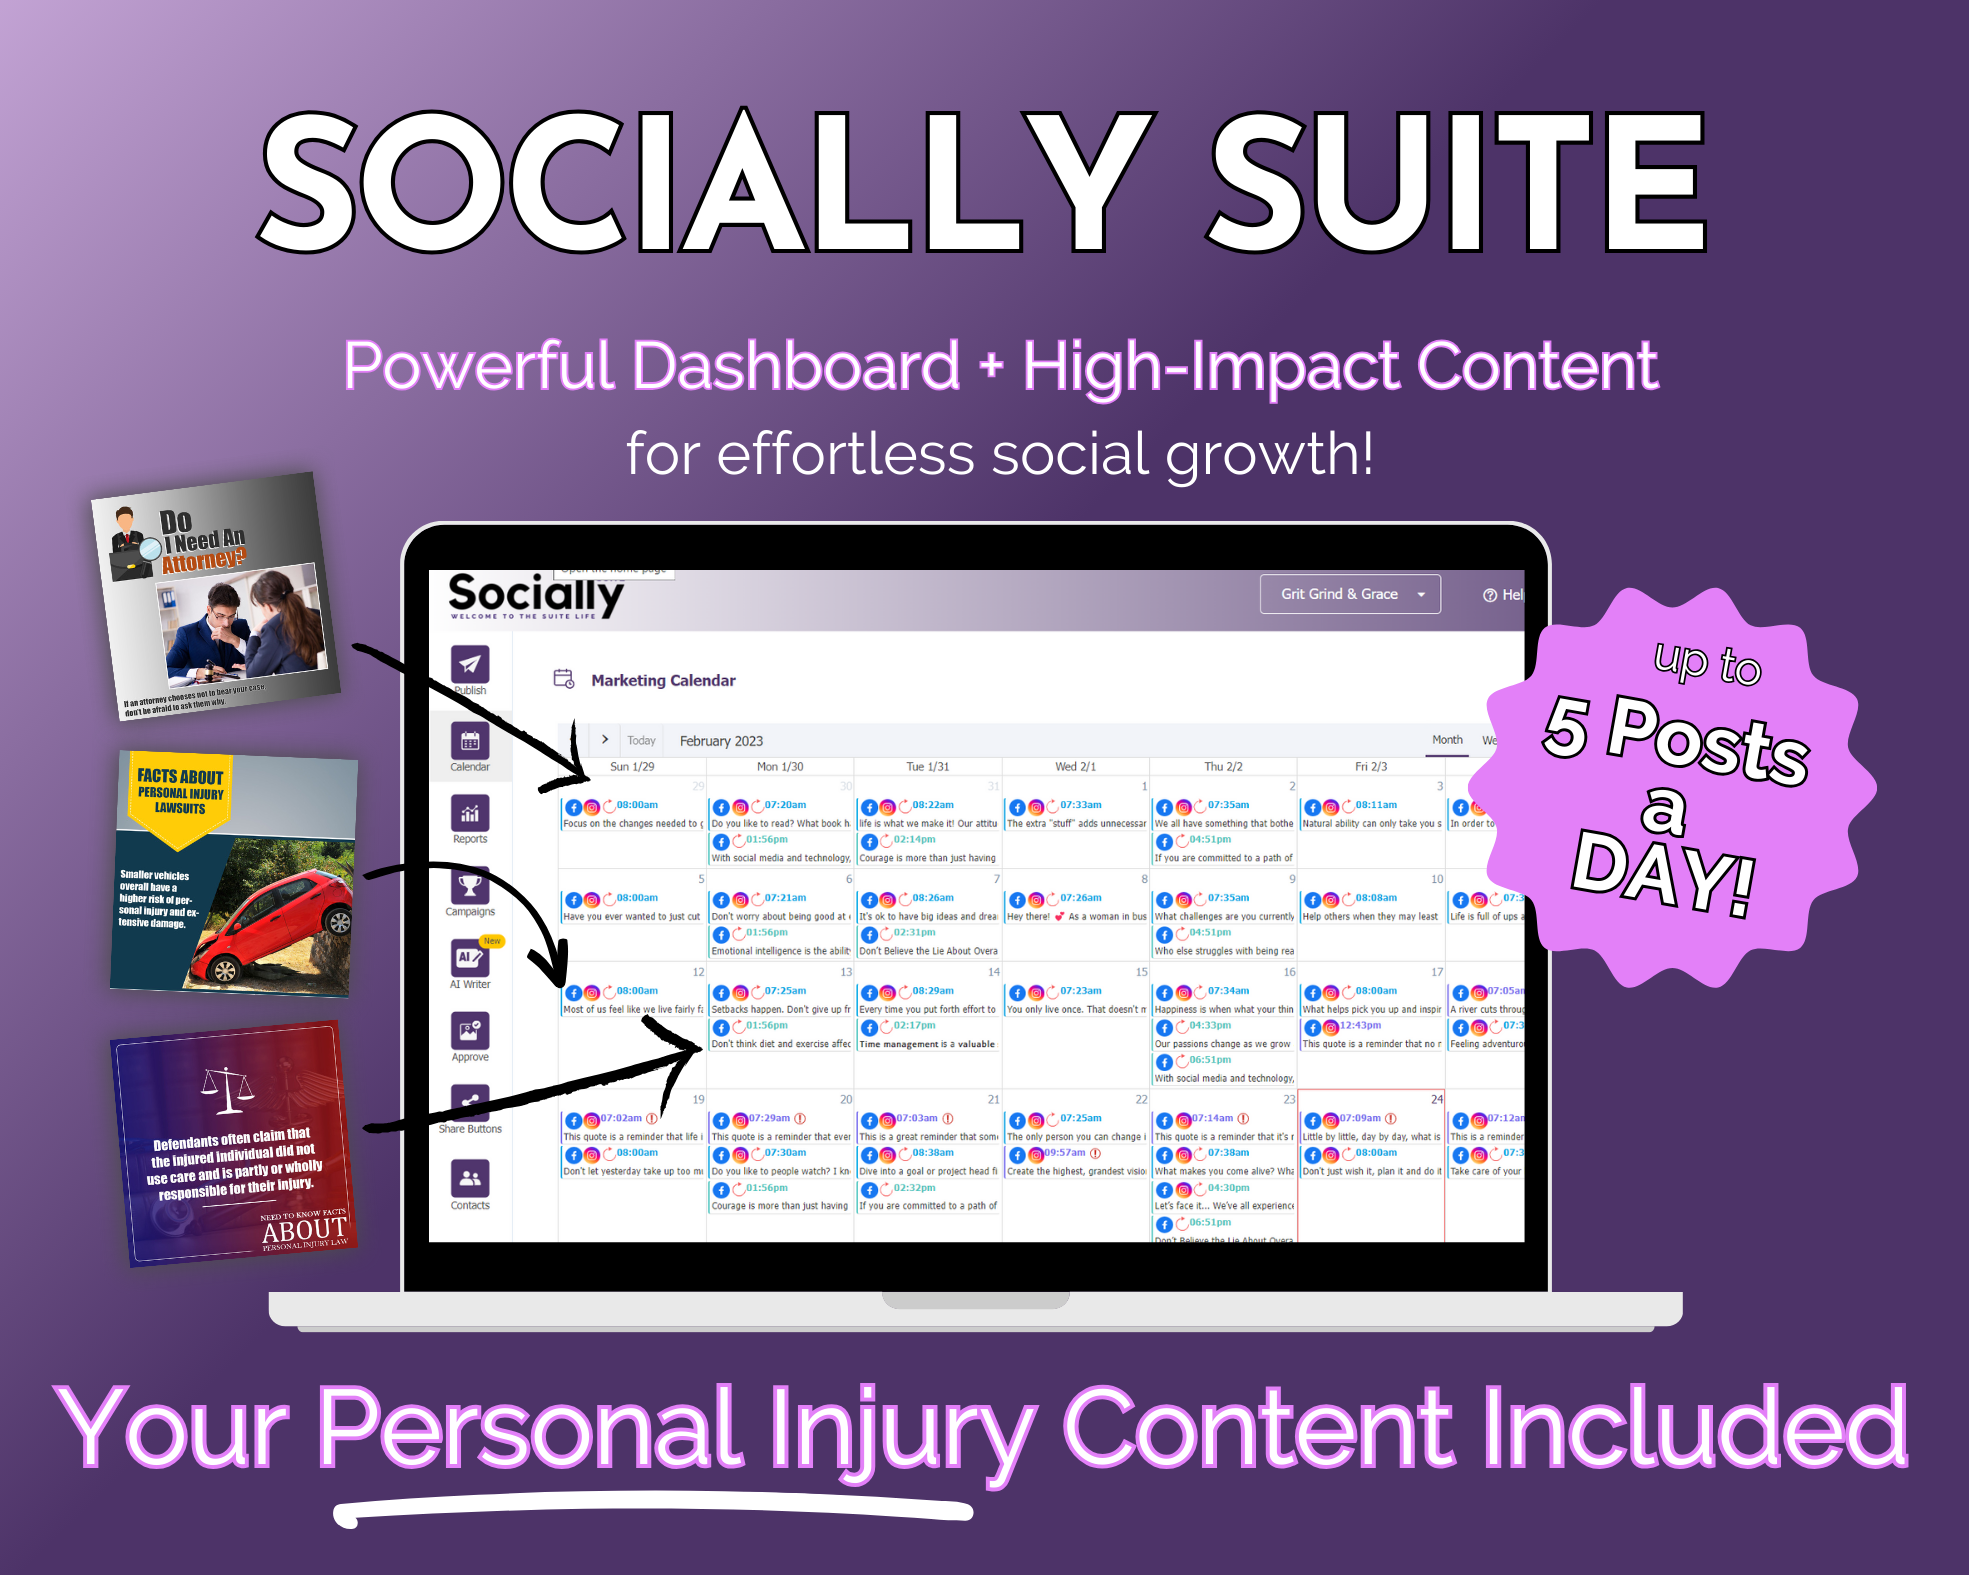 An interactive Socially Suite Membership Content Dashboard displaying a collection of text and images, fostering an effective Online Presence strategy for Get Socially Inclined's Social Media Marketing.